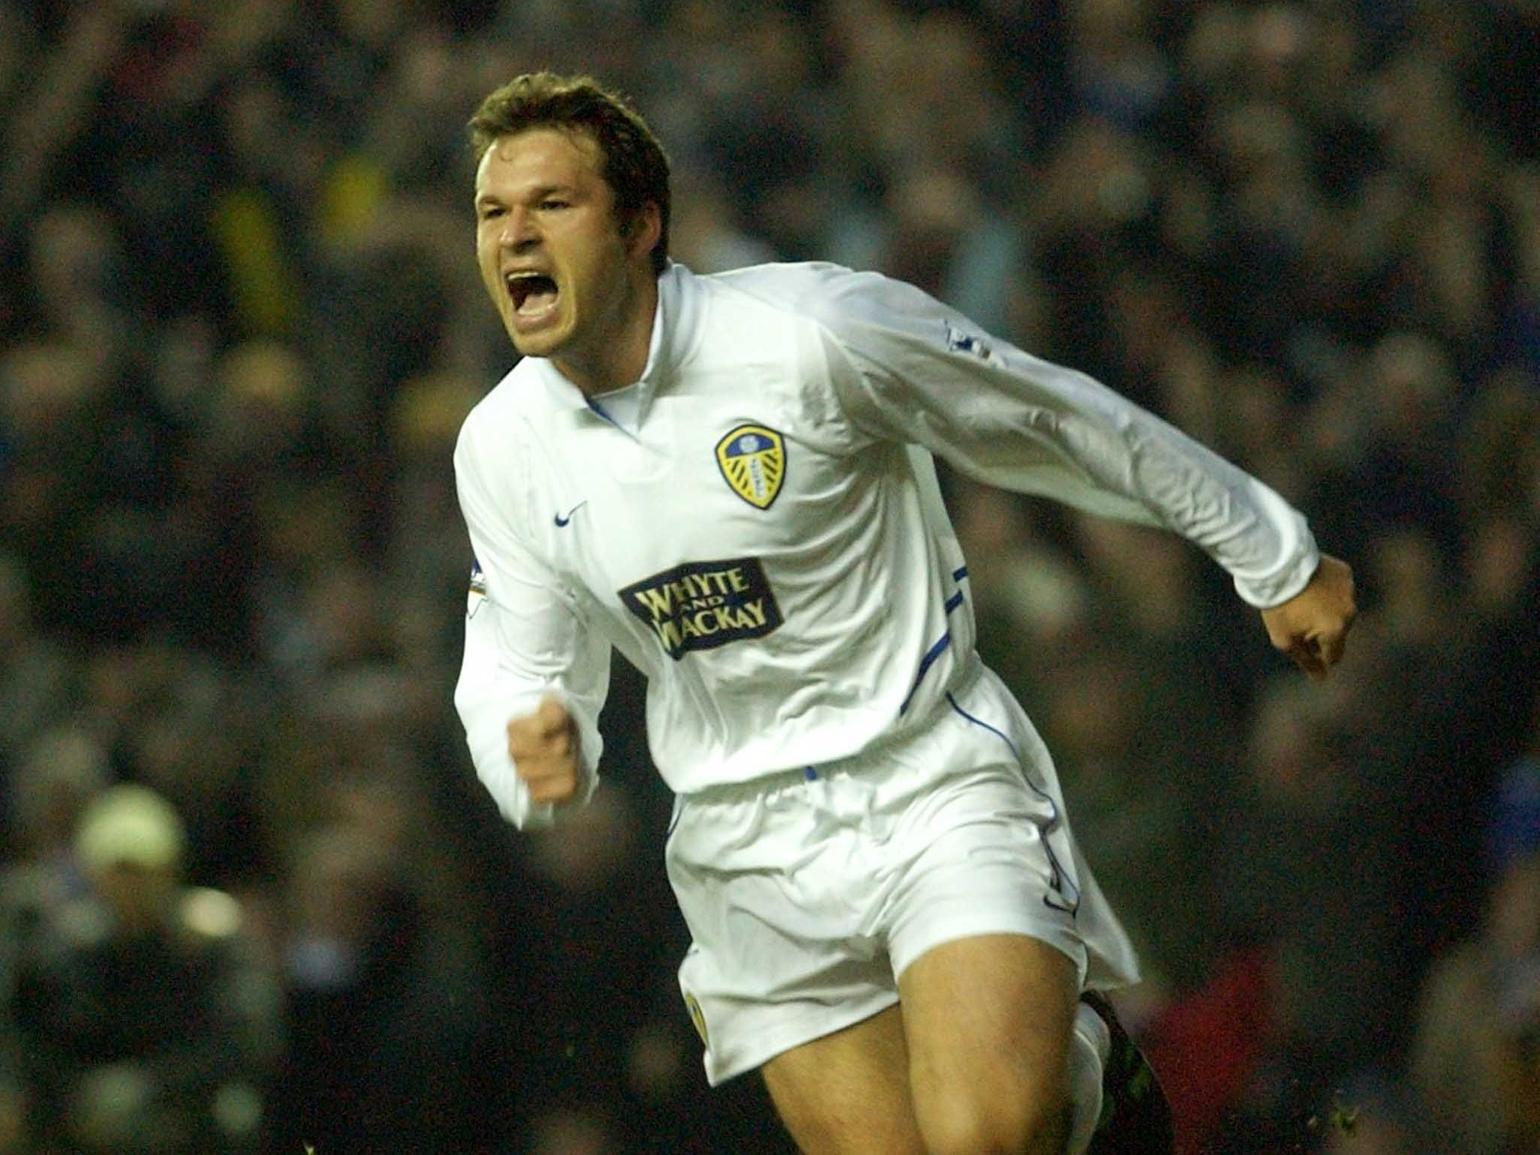 Mark Viduka celebrates scoring as the Whites were outclassed by the Gunners at Elland Road.